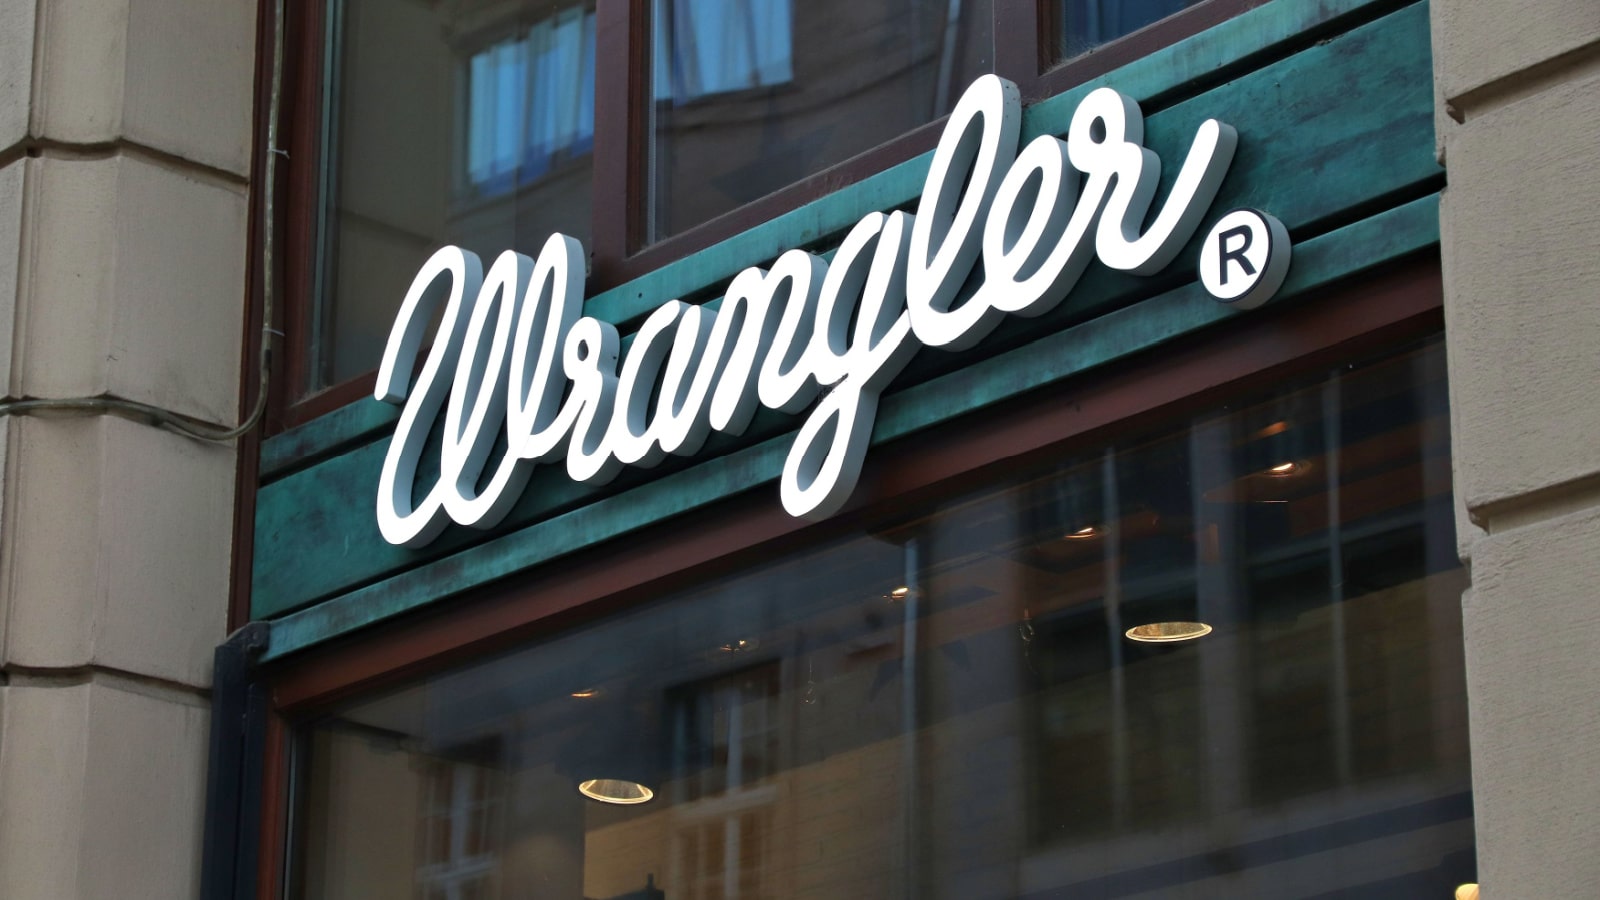 LEIPZIG, GERMANY - MAY 9, 2018: Wrangler store sign in Leipzig, Germany. Wrangler is an American brand of jeans owned by Kontoor Brands.